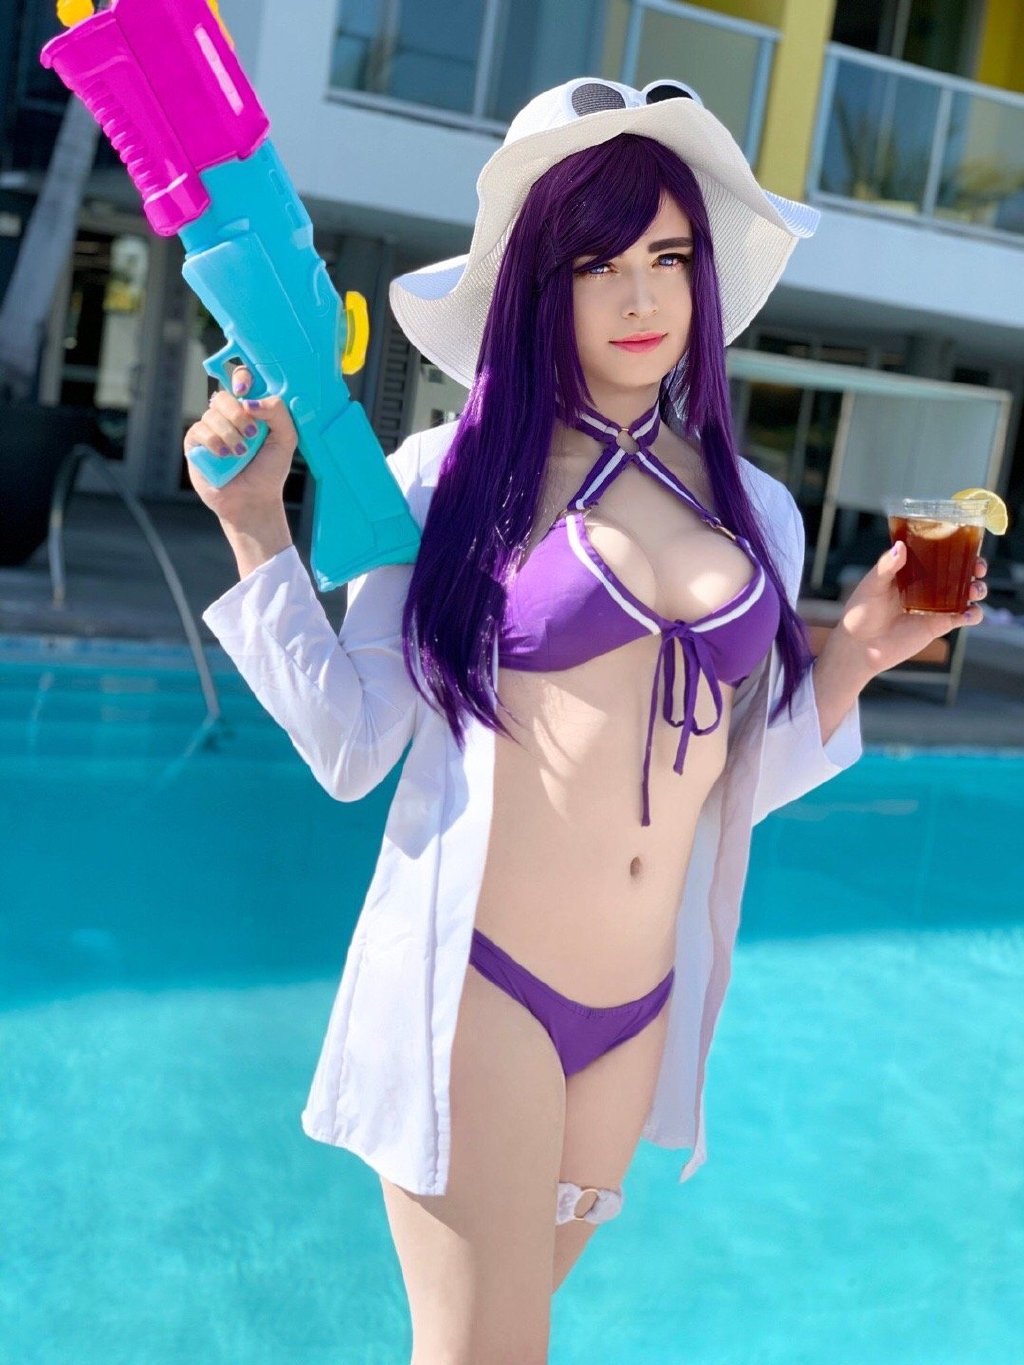 Sneaky makes his cosplay comeback as Pool Party Caitlyn.